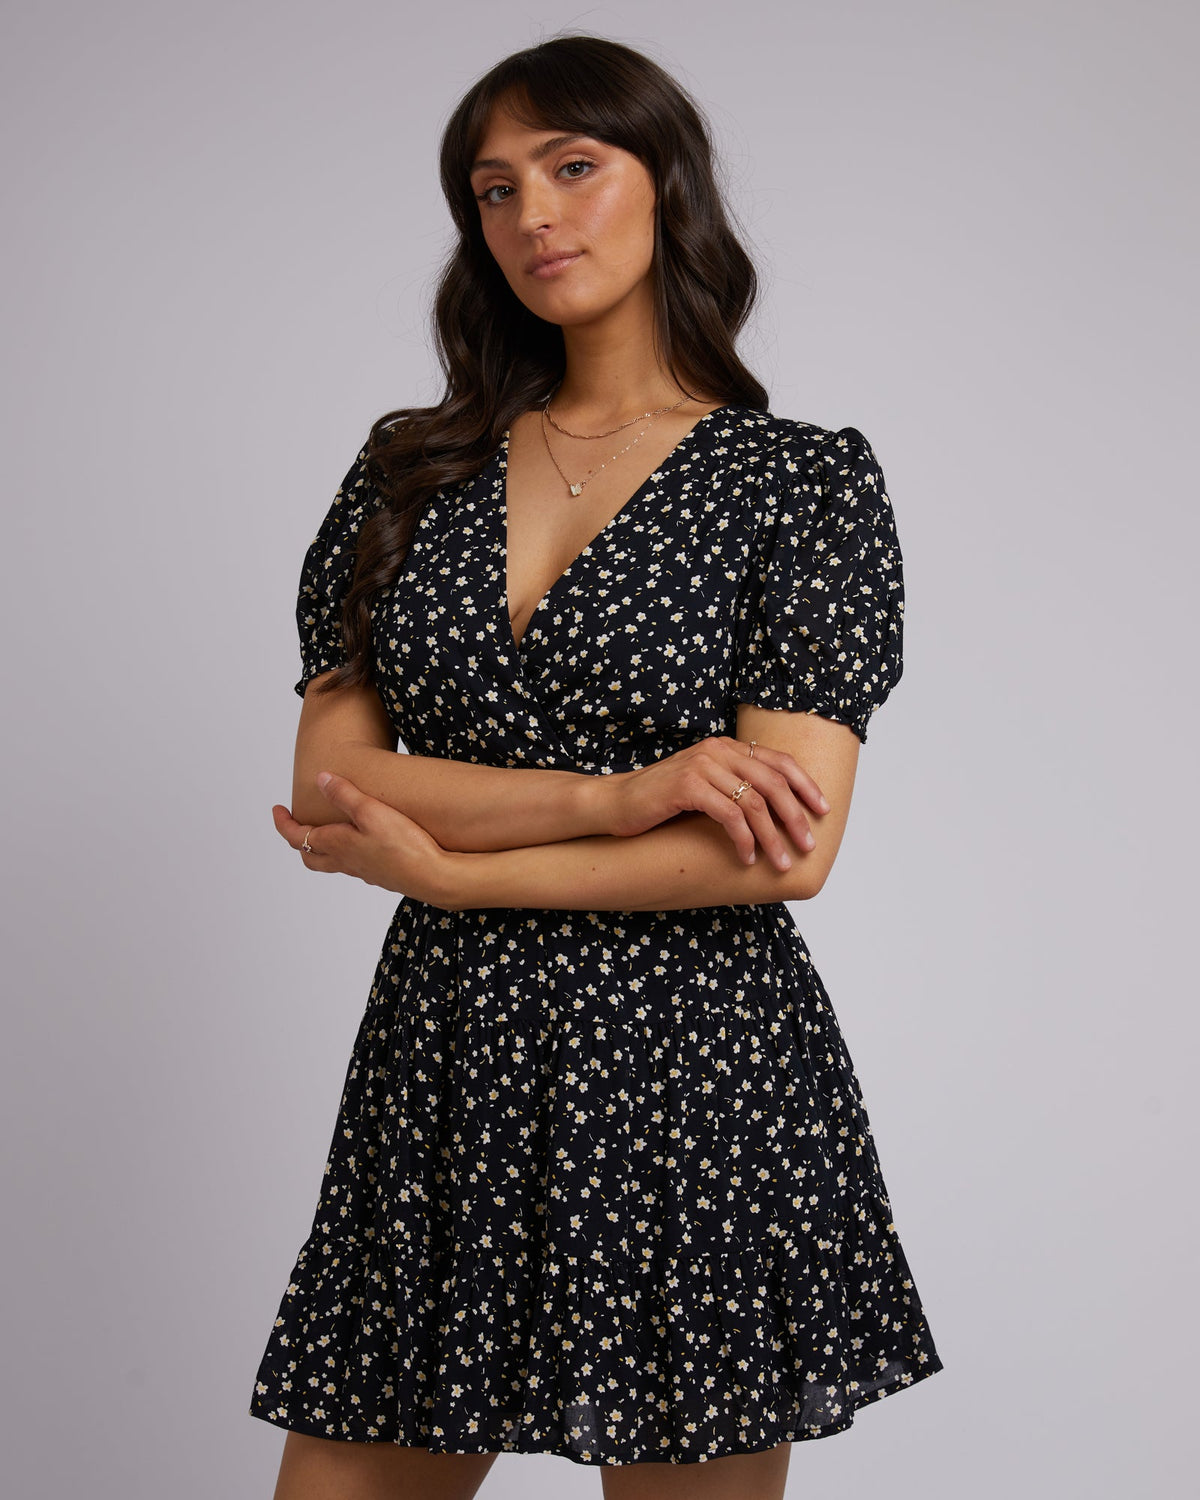 All About Eve-Lily Floral Print Mini Dress-Edge Clothing